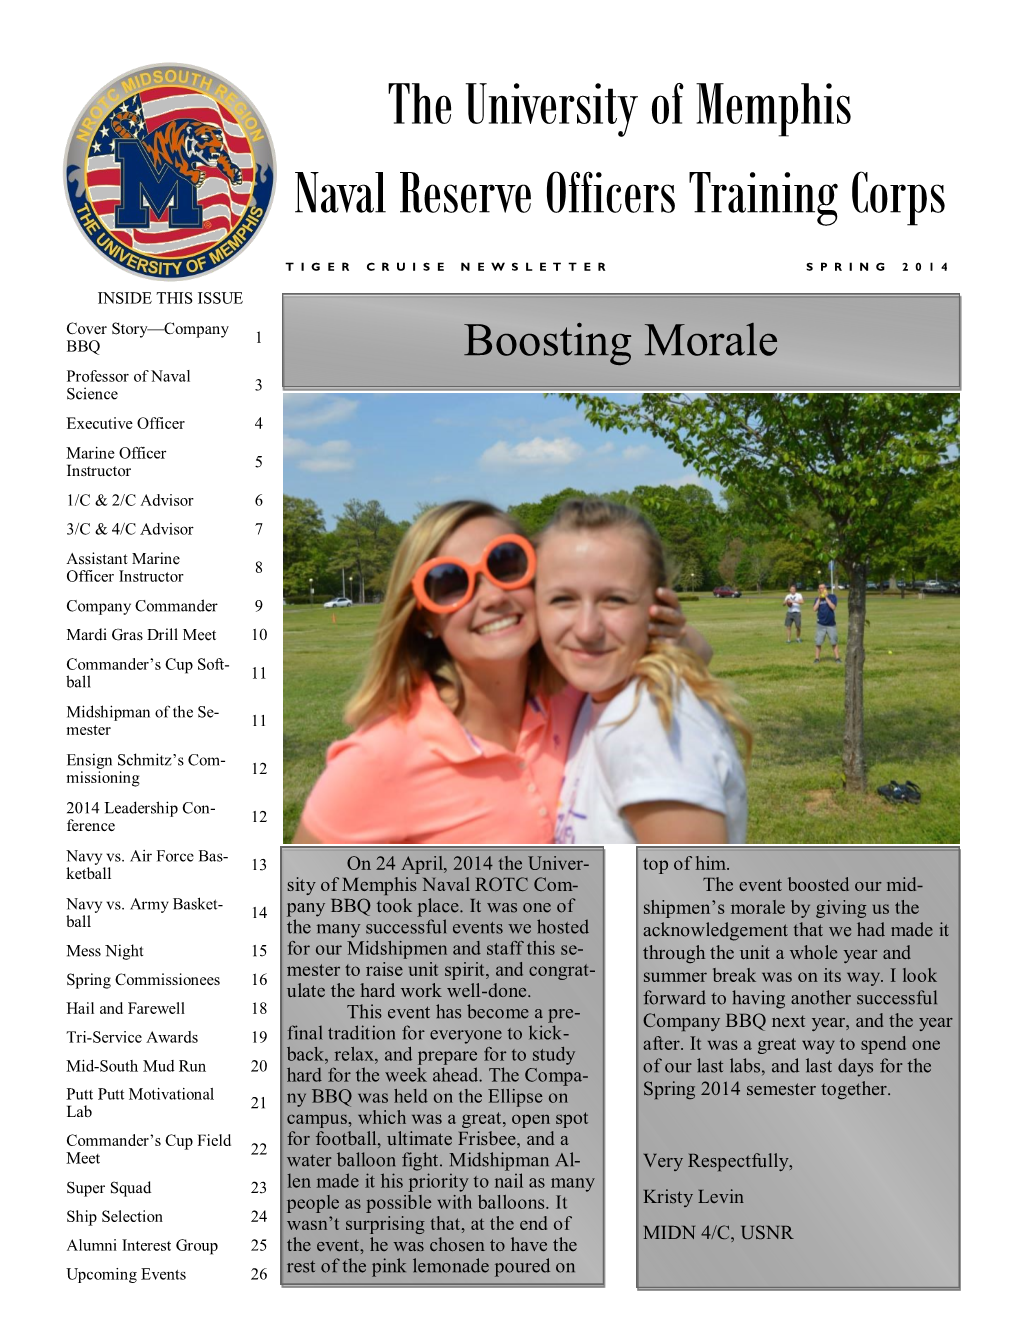 The University of Memphis Naval Reserve Officers Training Corps